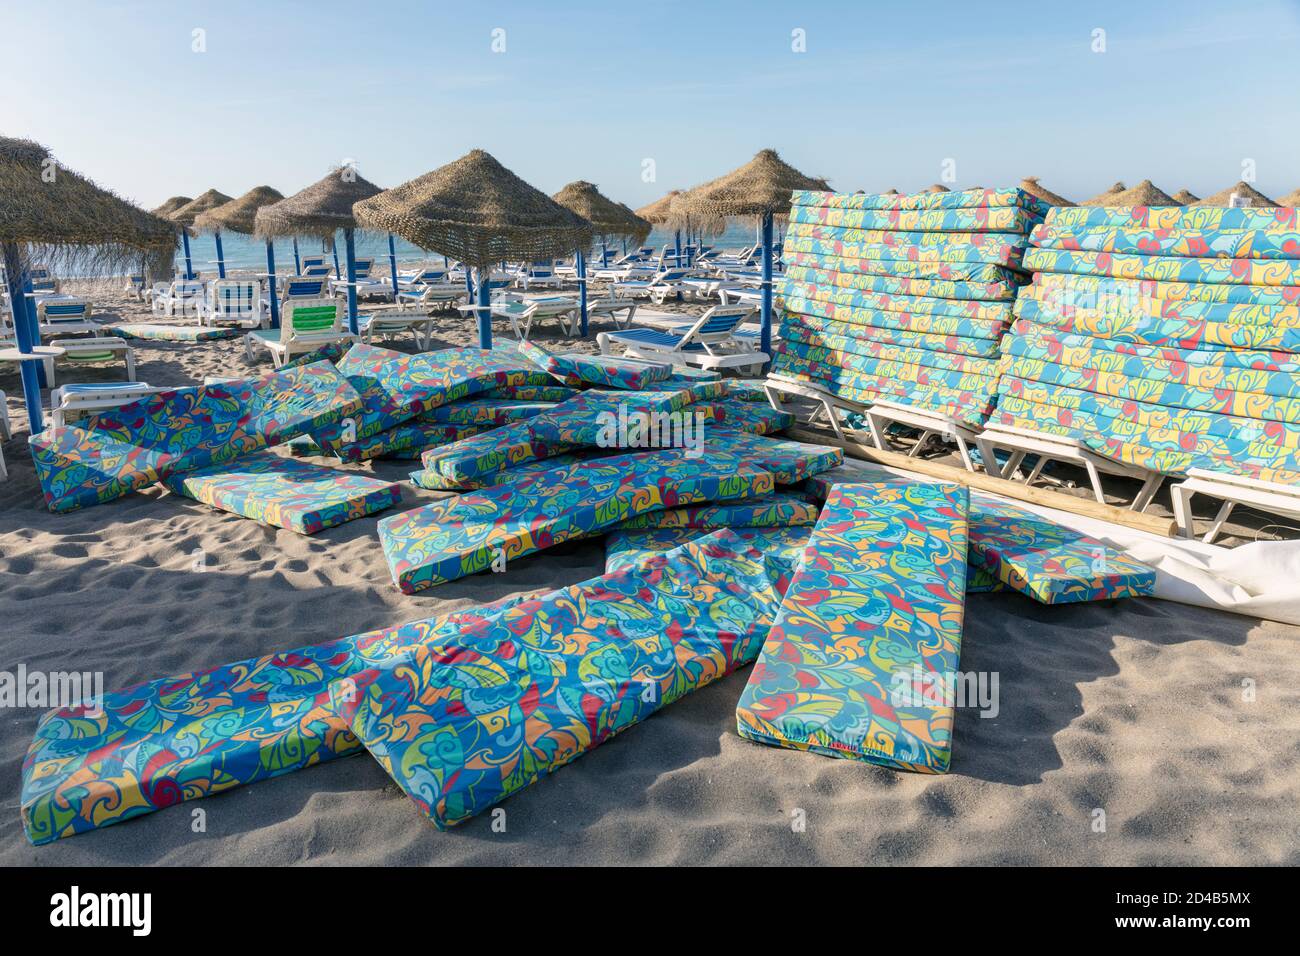 Piles of sunbed mattresses on Costa del Sol beach waiting to be placed under sun umbrellas.  Torremolinos, Costa del Sol, Malaga Province, Andalusia, Stock Photo